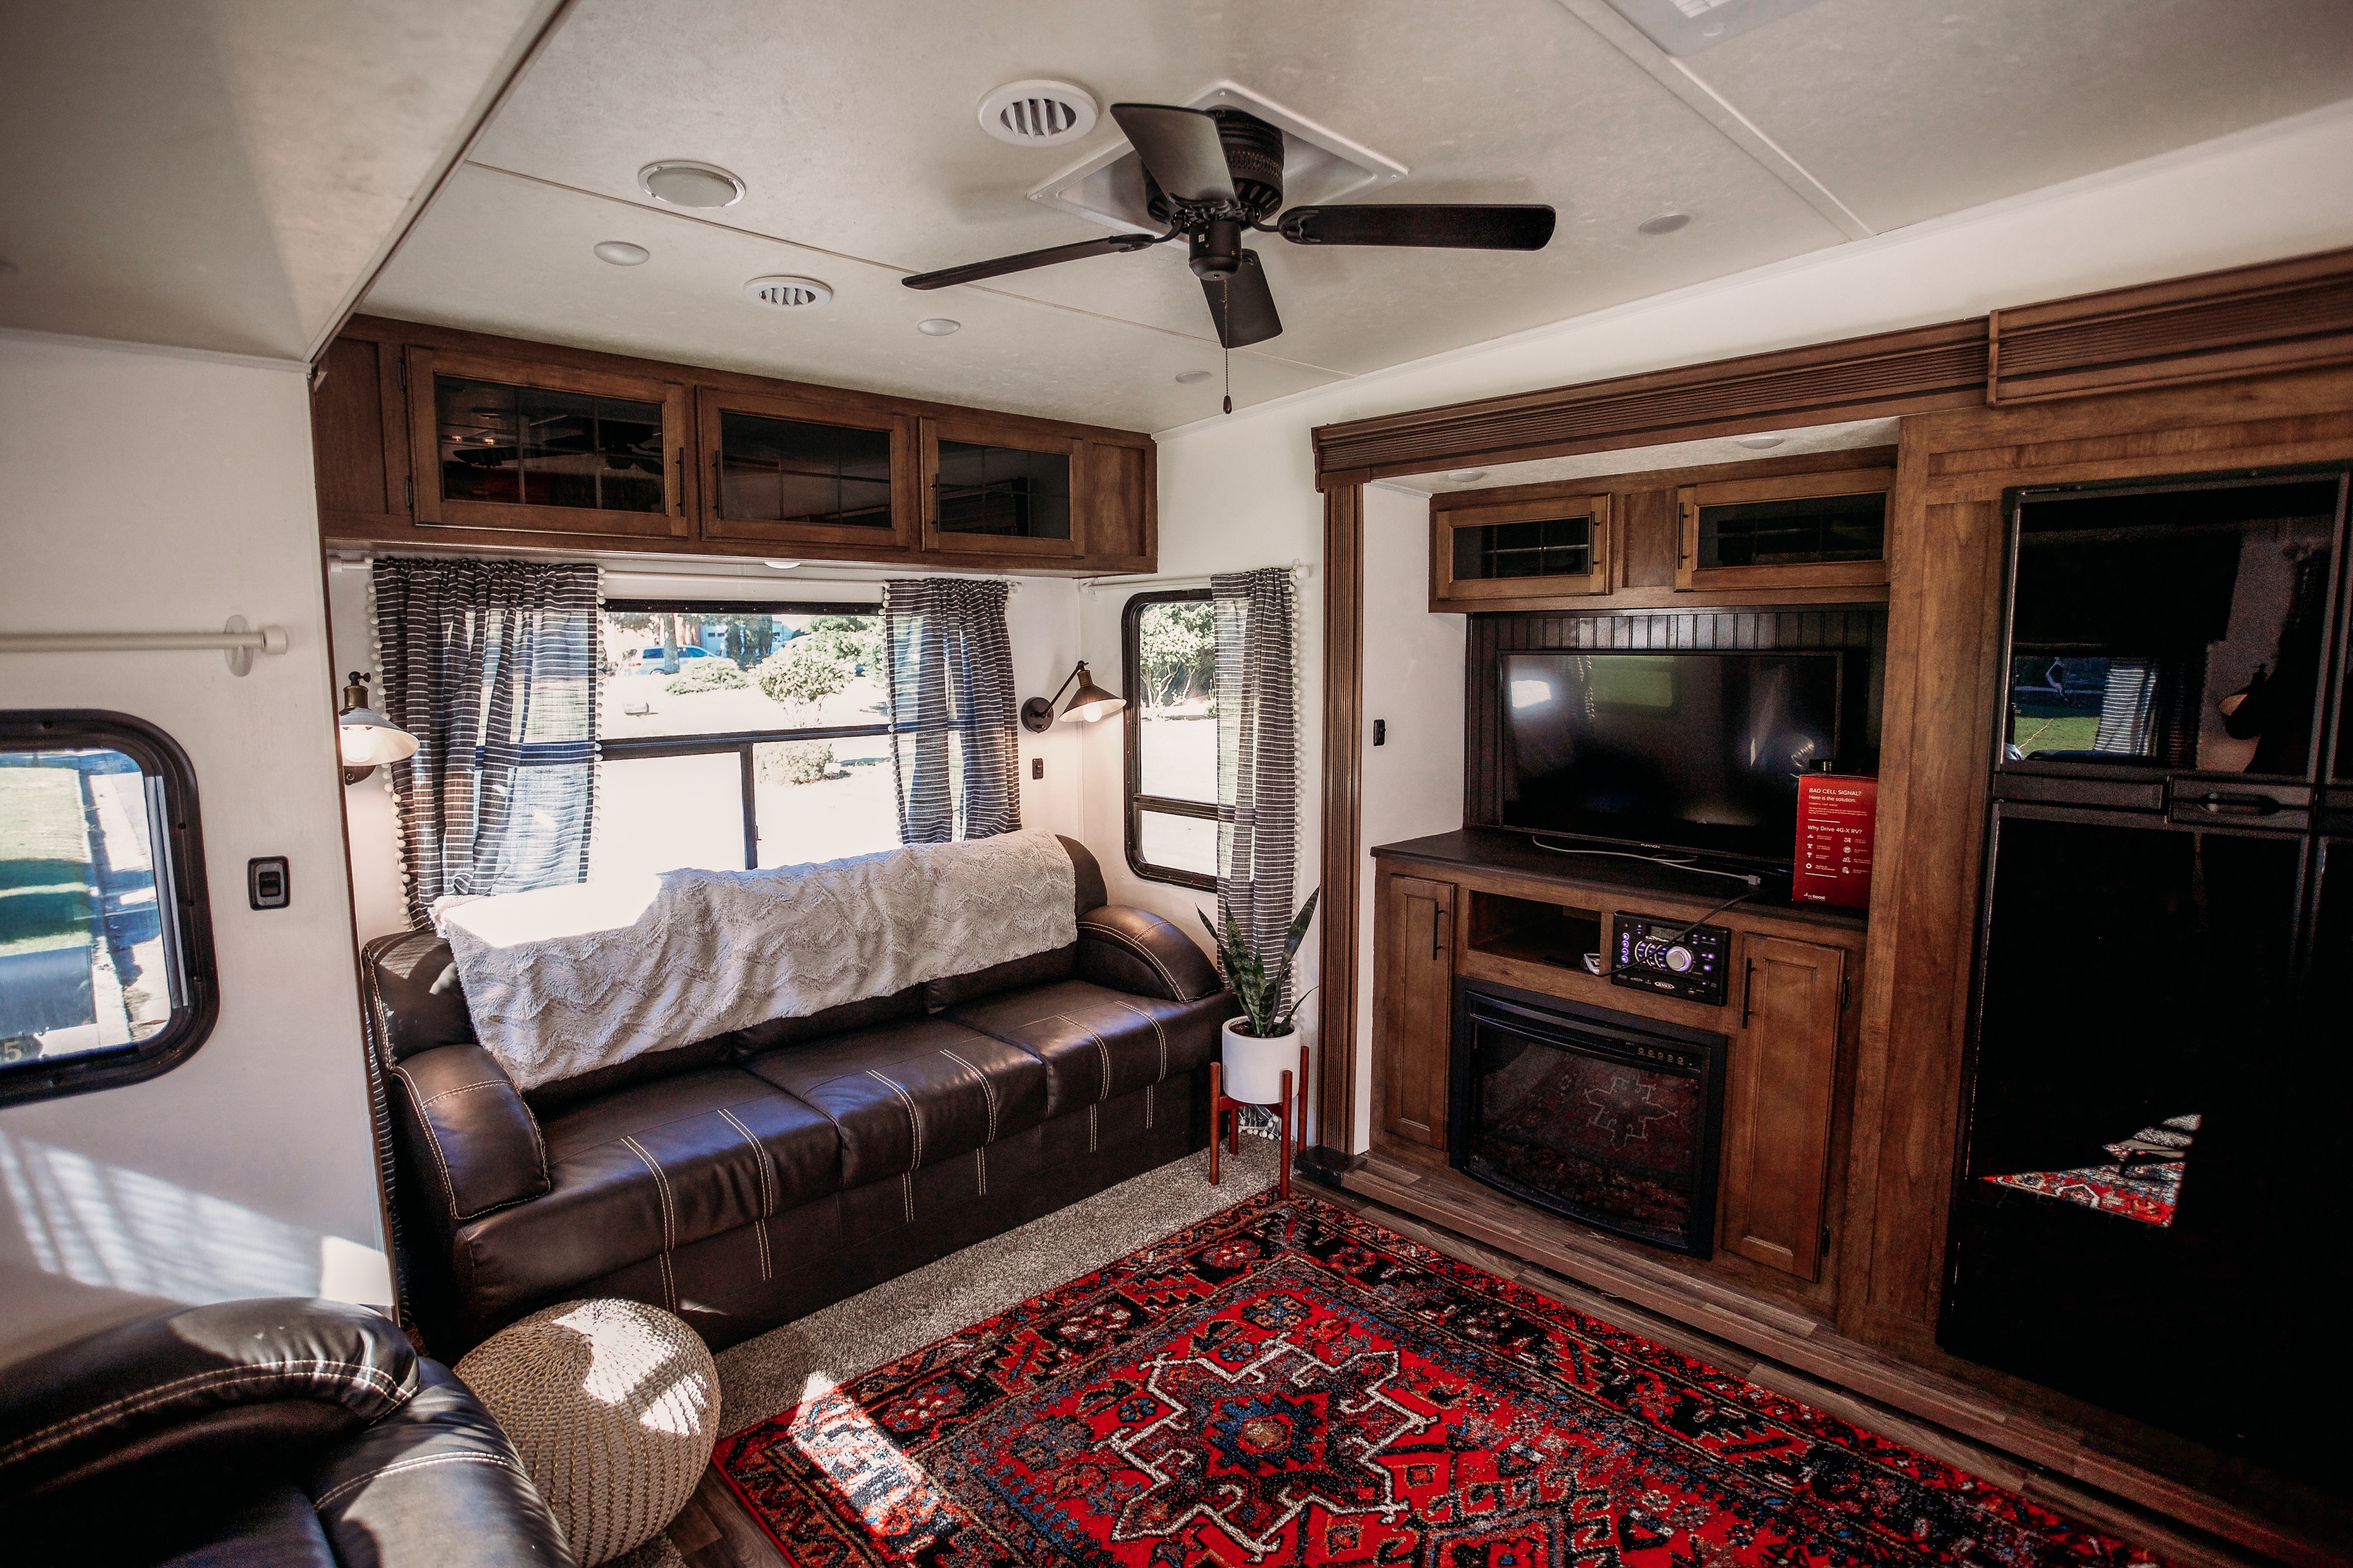 Living room of an RV